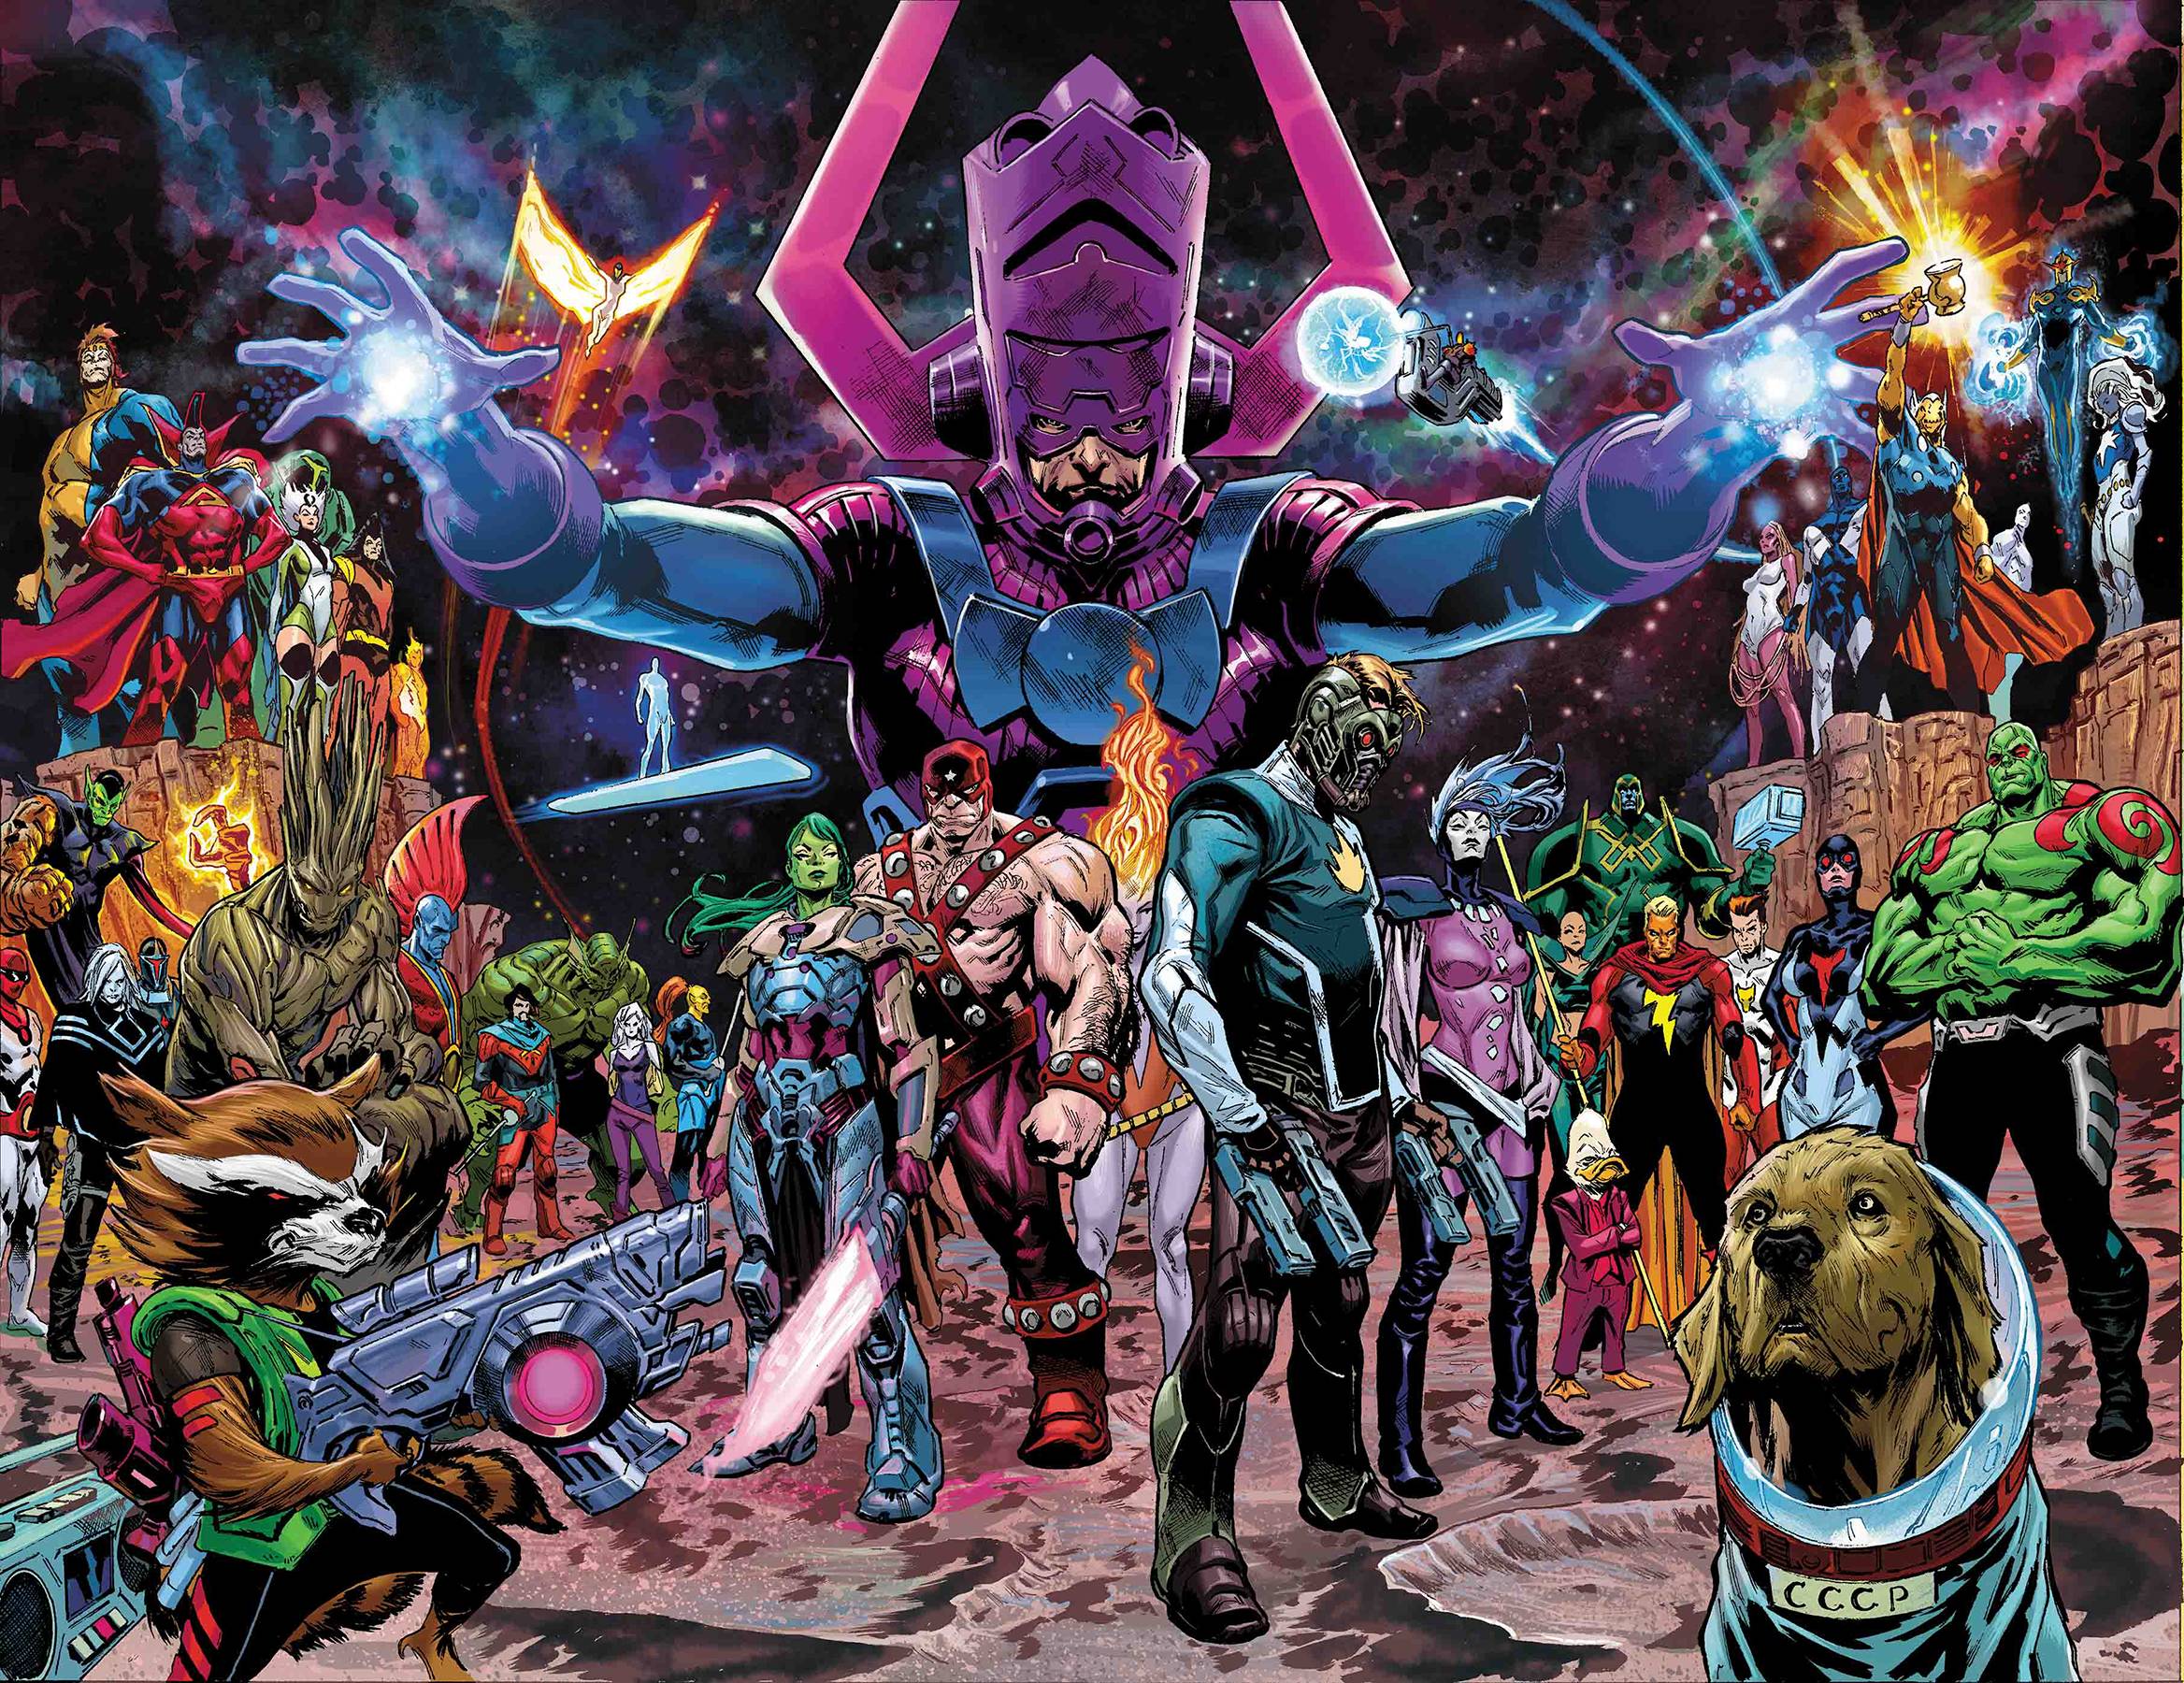 GUARDIANS OF THE GALAXY #1 BY SHAW POSTER